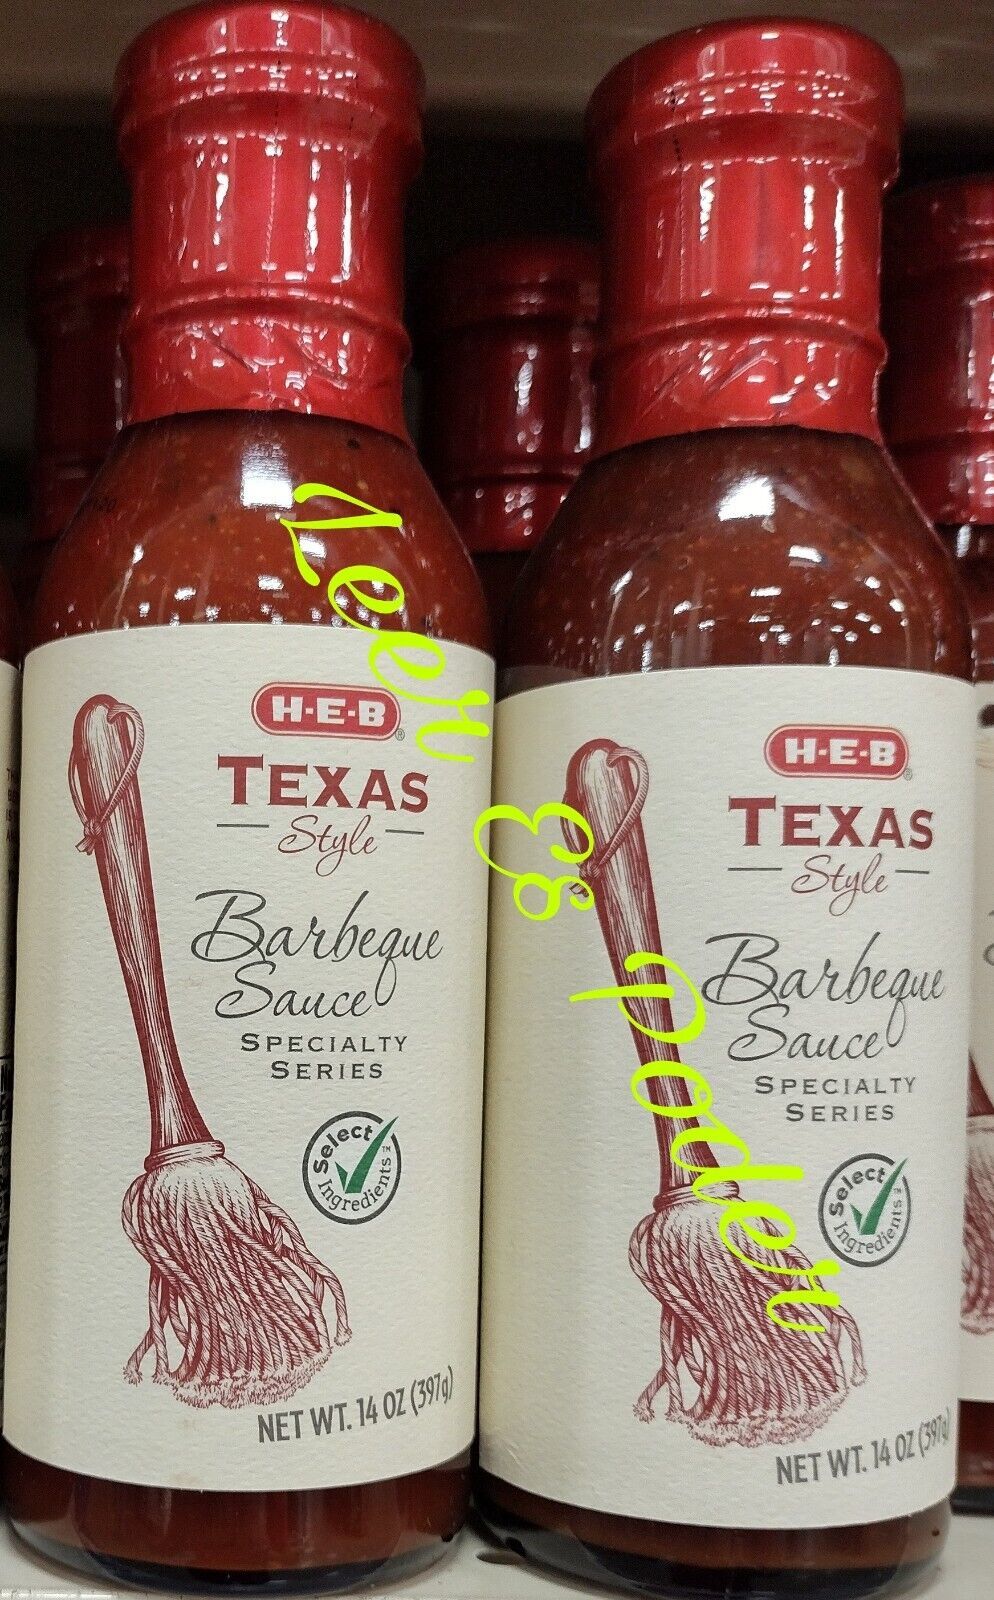 2X HEB BARBEQUE SAUCE TEXAS STYLE - 2 BOTTLES 14 Oz EACH -FREE PRIORITY SHIPPING - $21.28